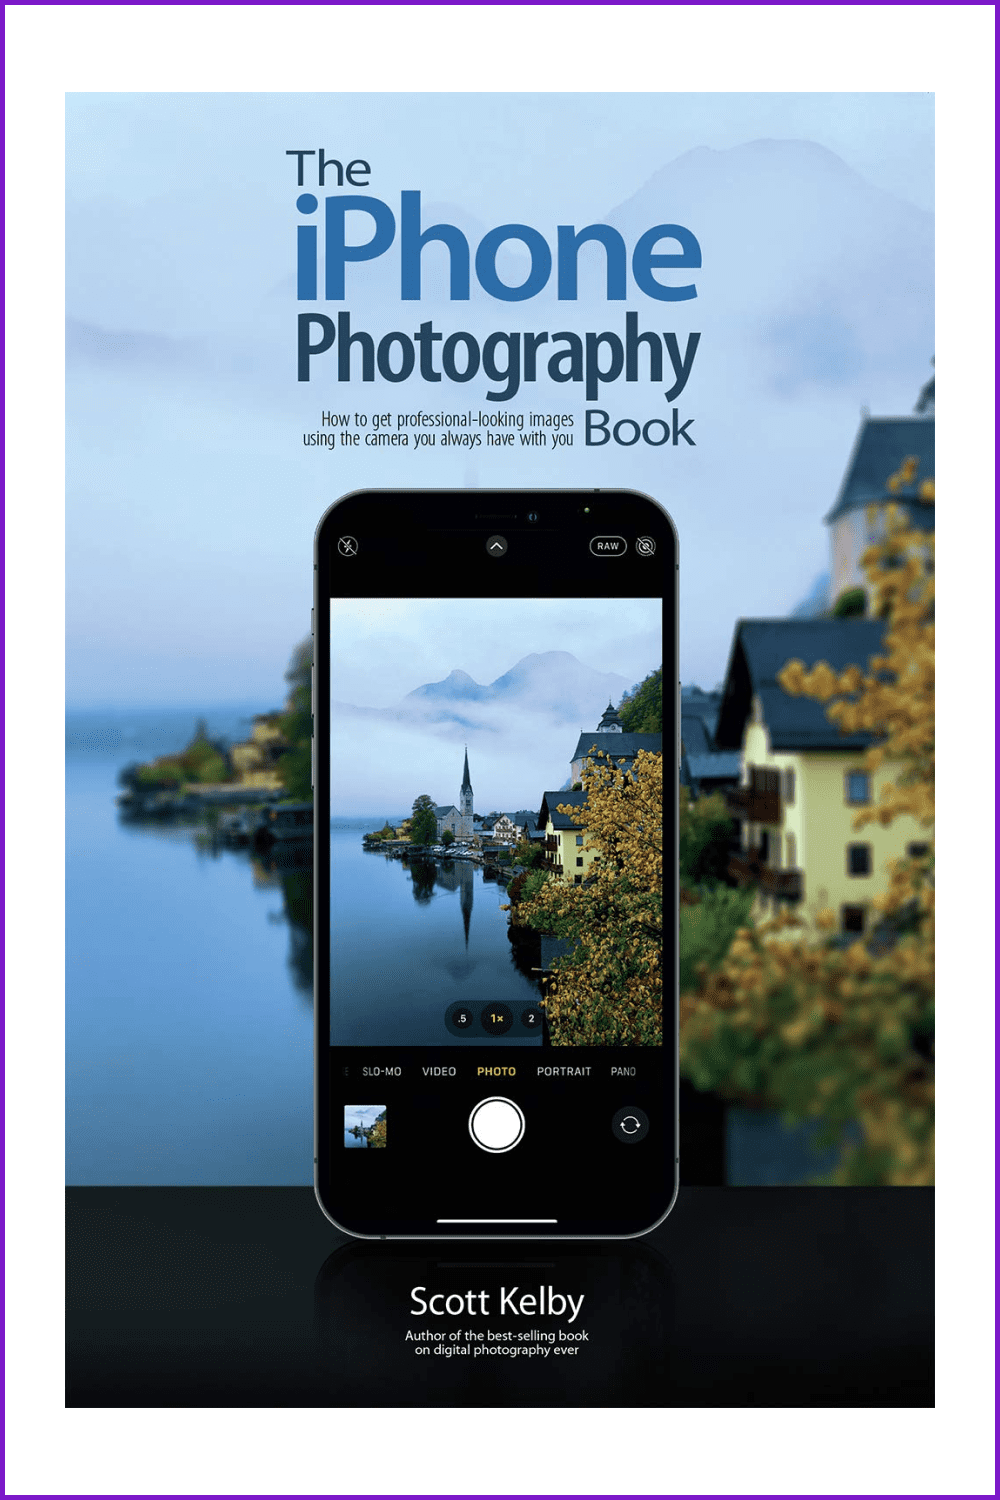 The iPhone Photography Book.